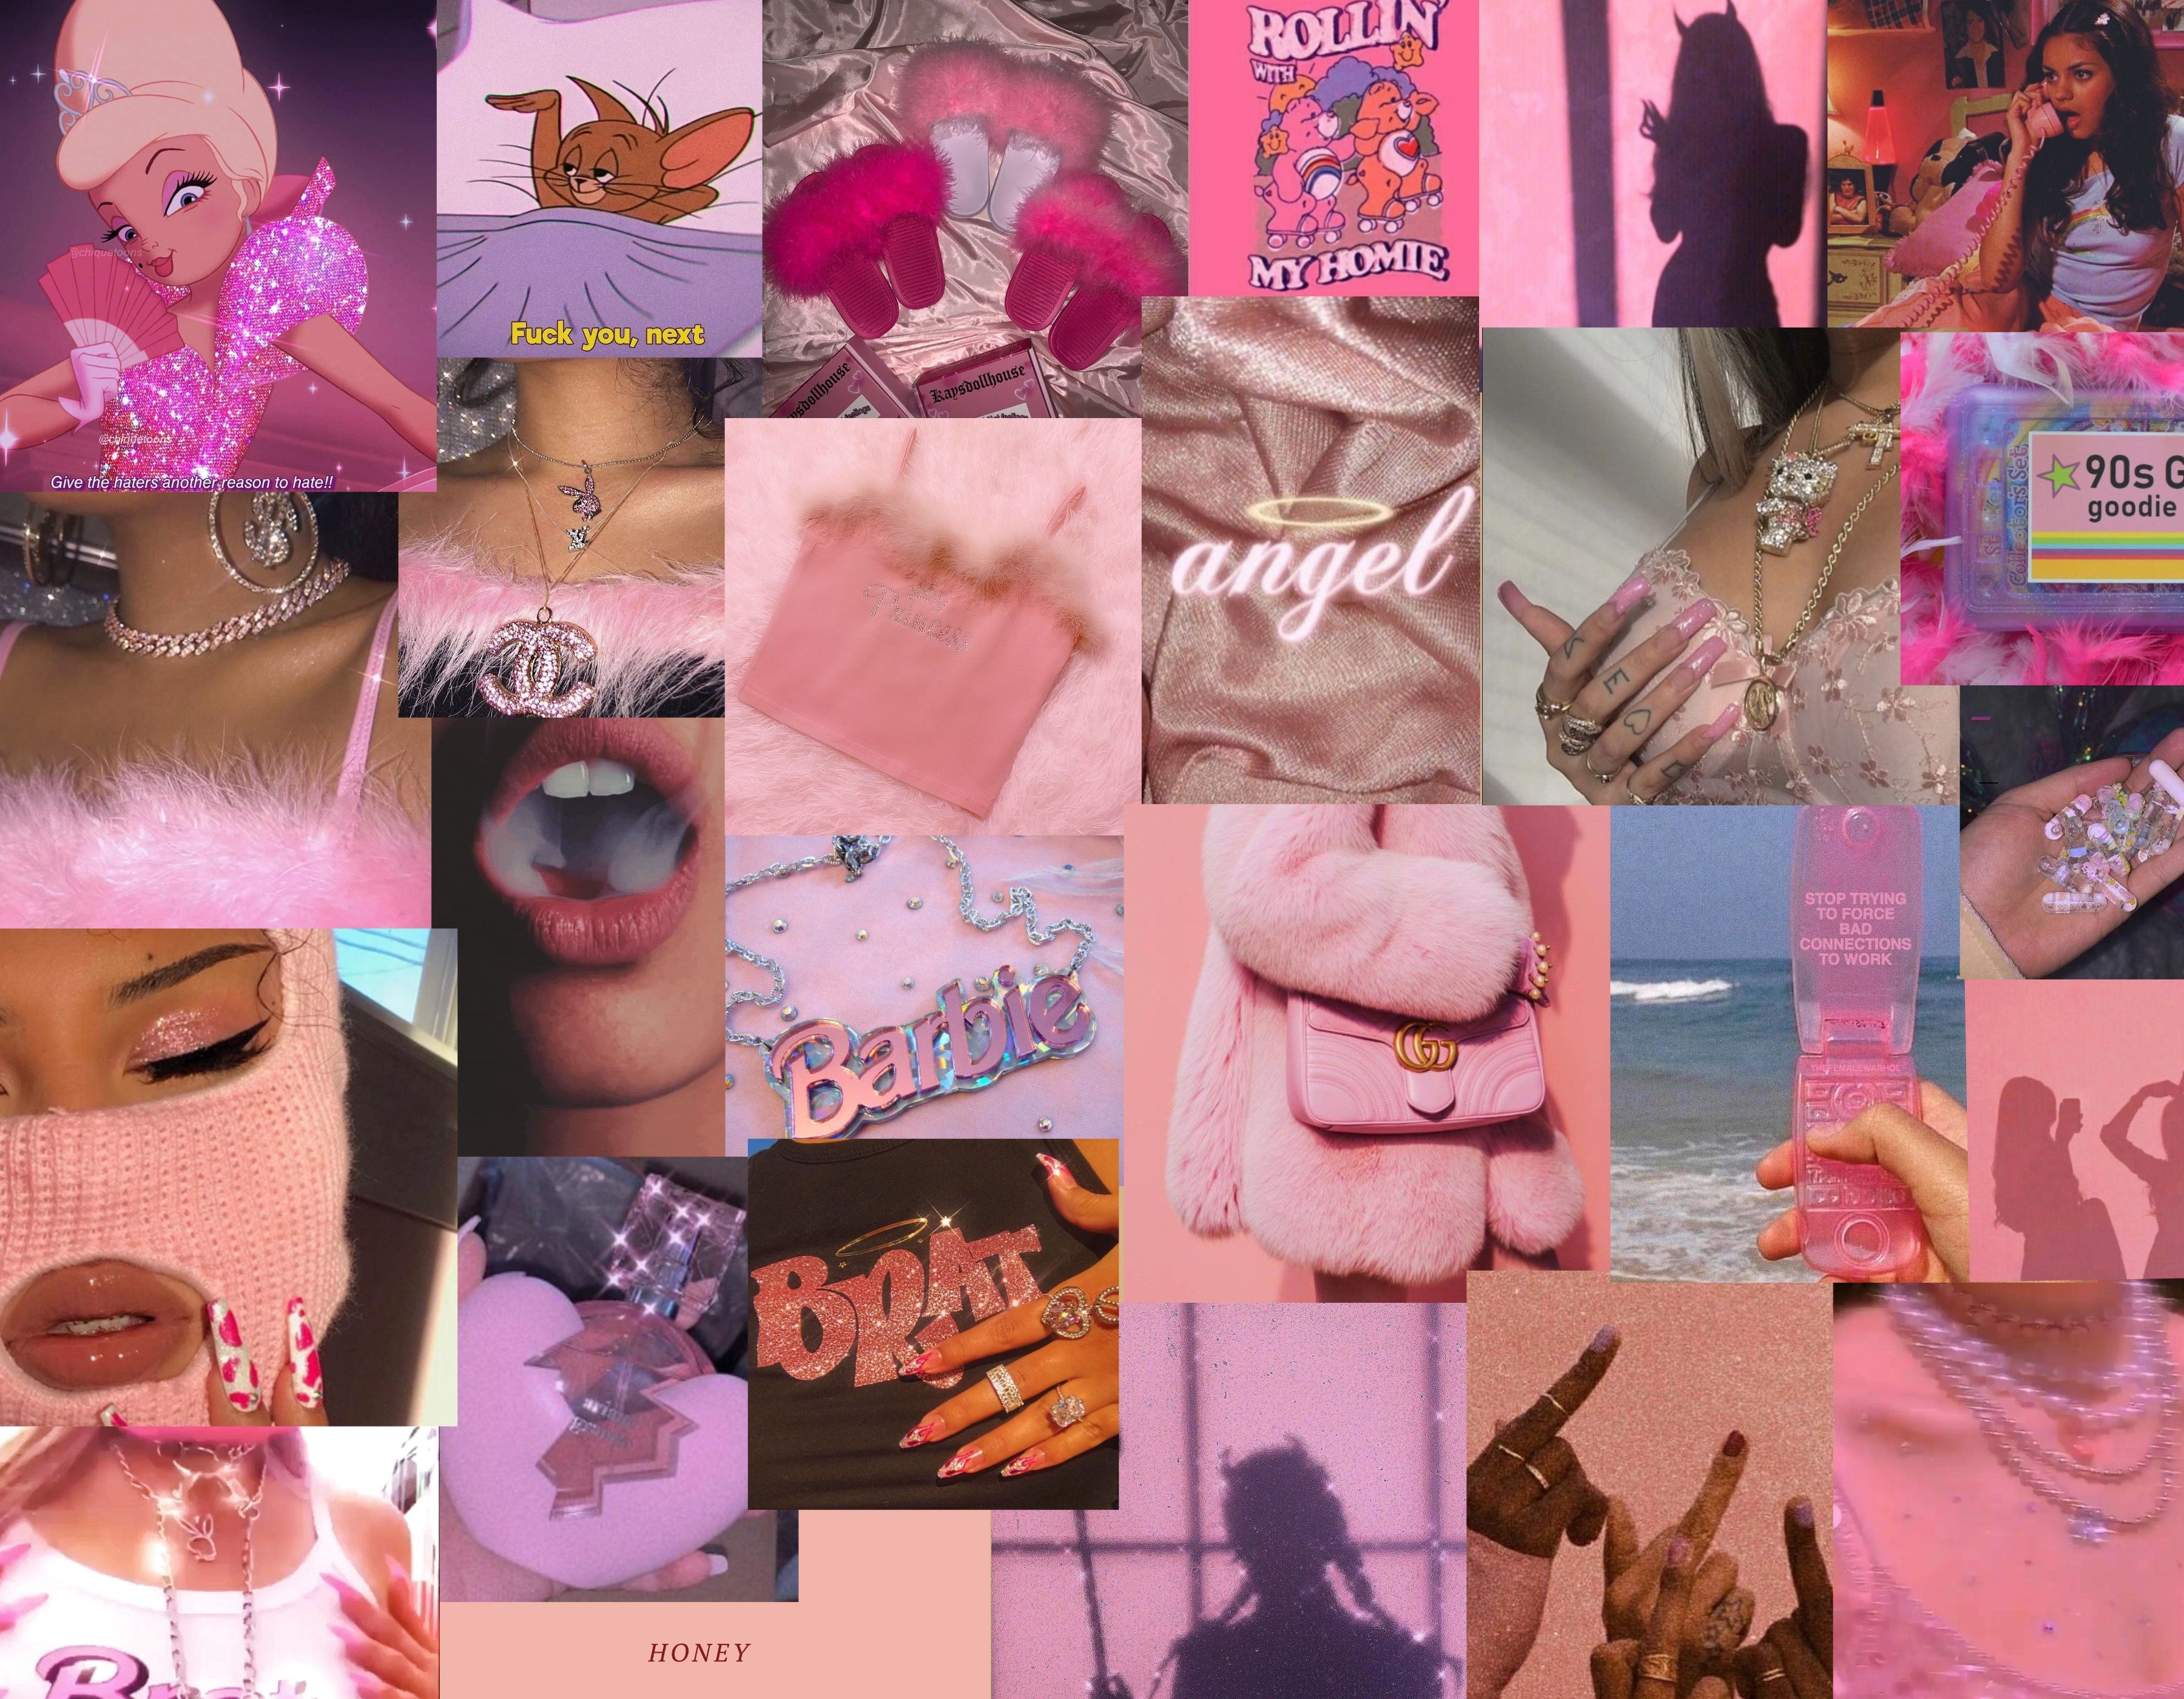 Baddie Aesthetic Wallpaper Laptop Pink Baddie Is An Aesthetic Primarily Associated With Instagram And Beauty Gurus On Youtube That Is Centered Around Being Conventionally Attractive By Today 039 S Beauty Standards